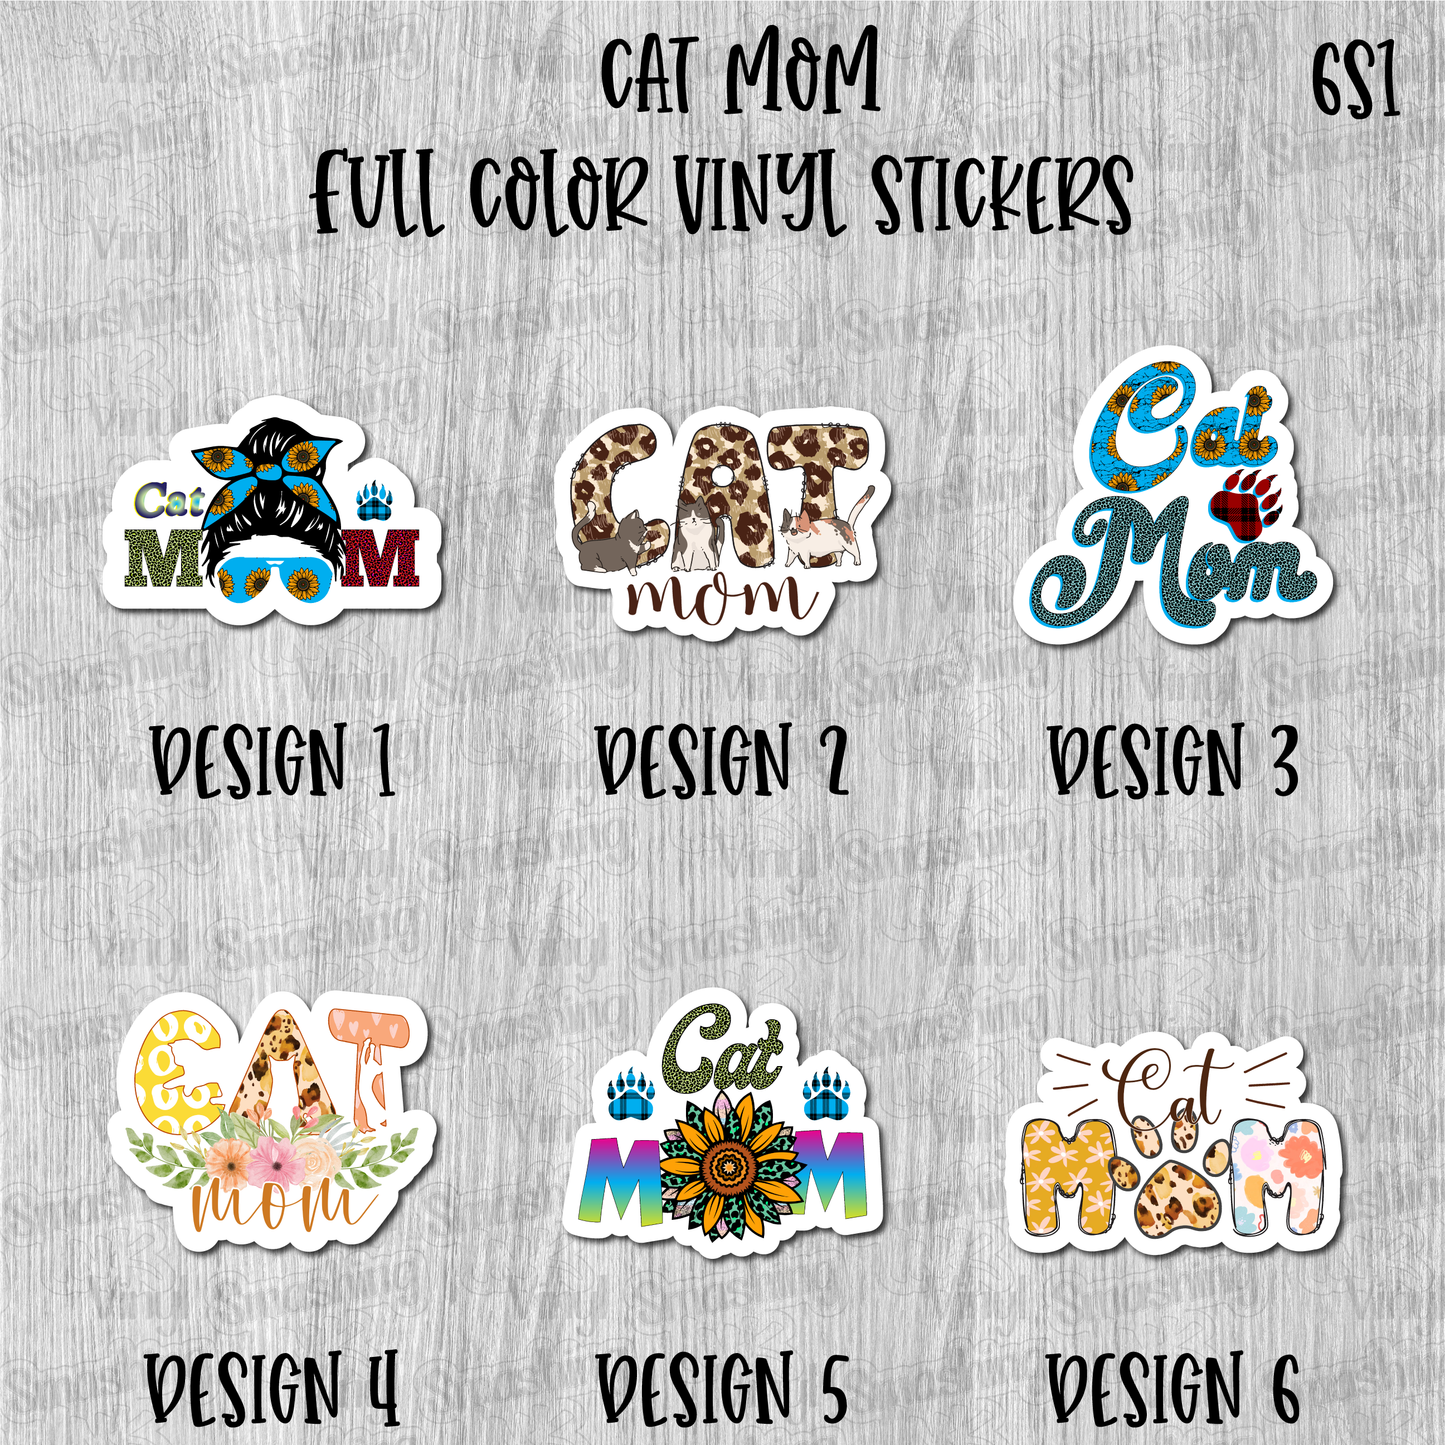 Cat Mom - Full Color Vinyl Stickers (SHIPS IN 3-7 BUS DAYS)